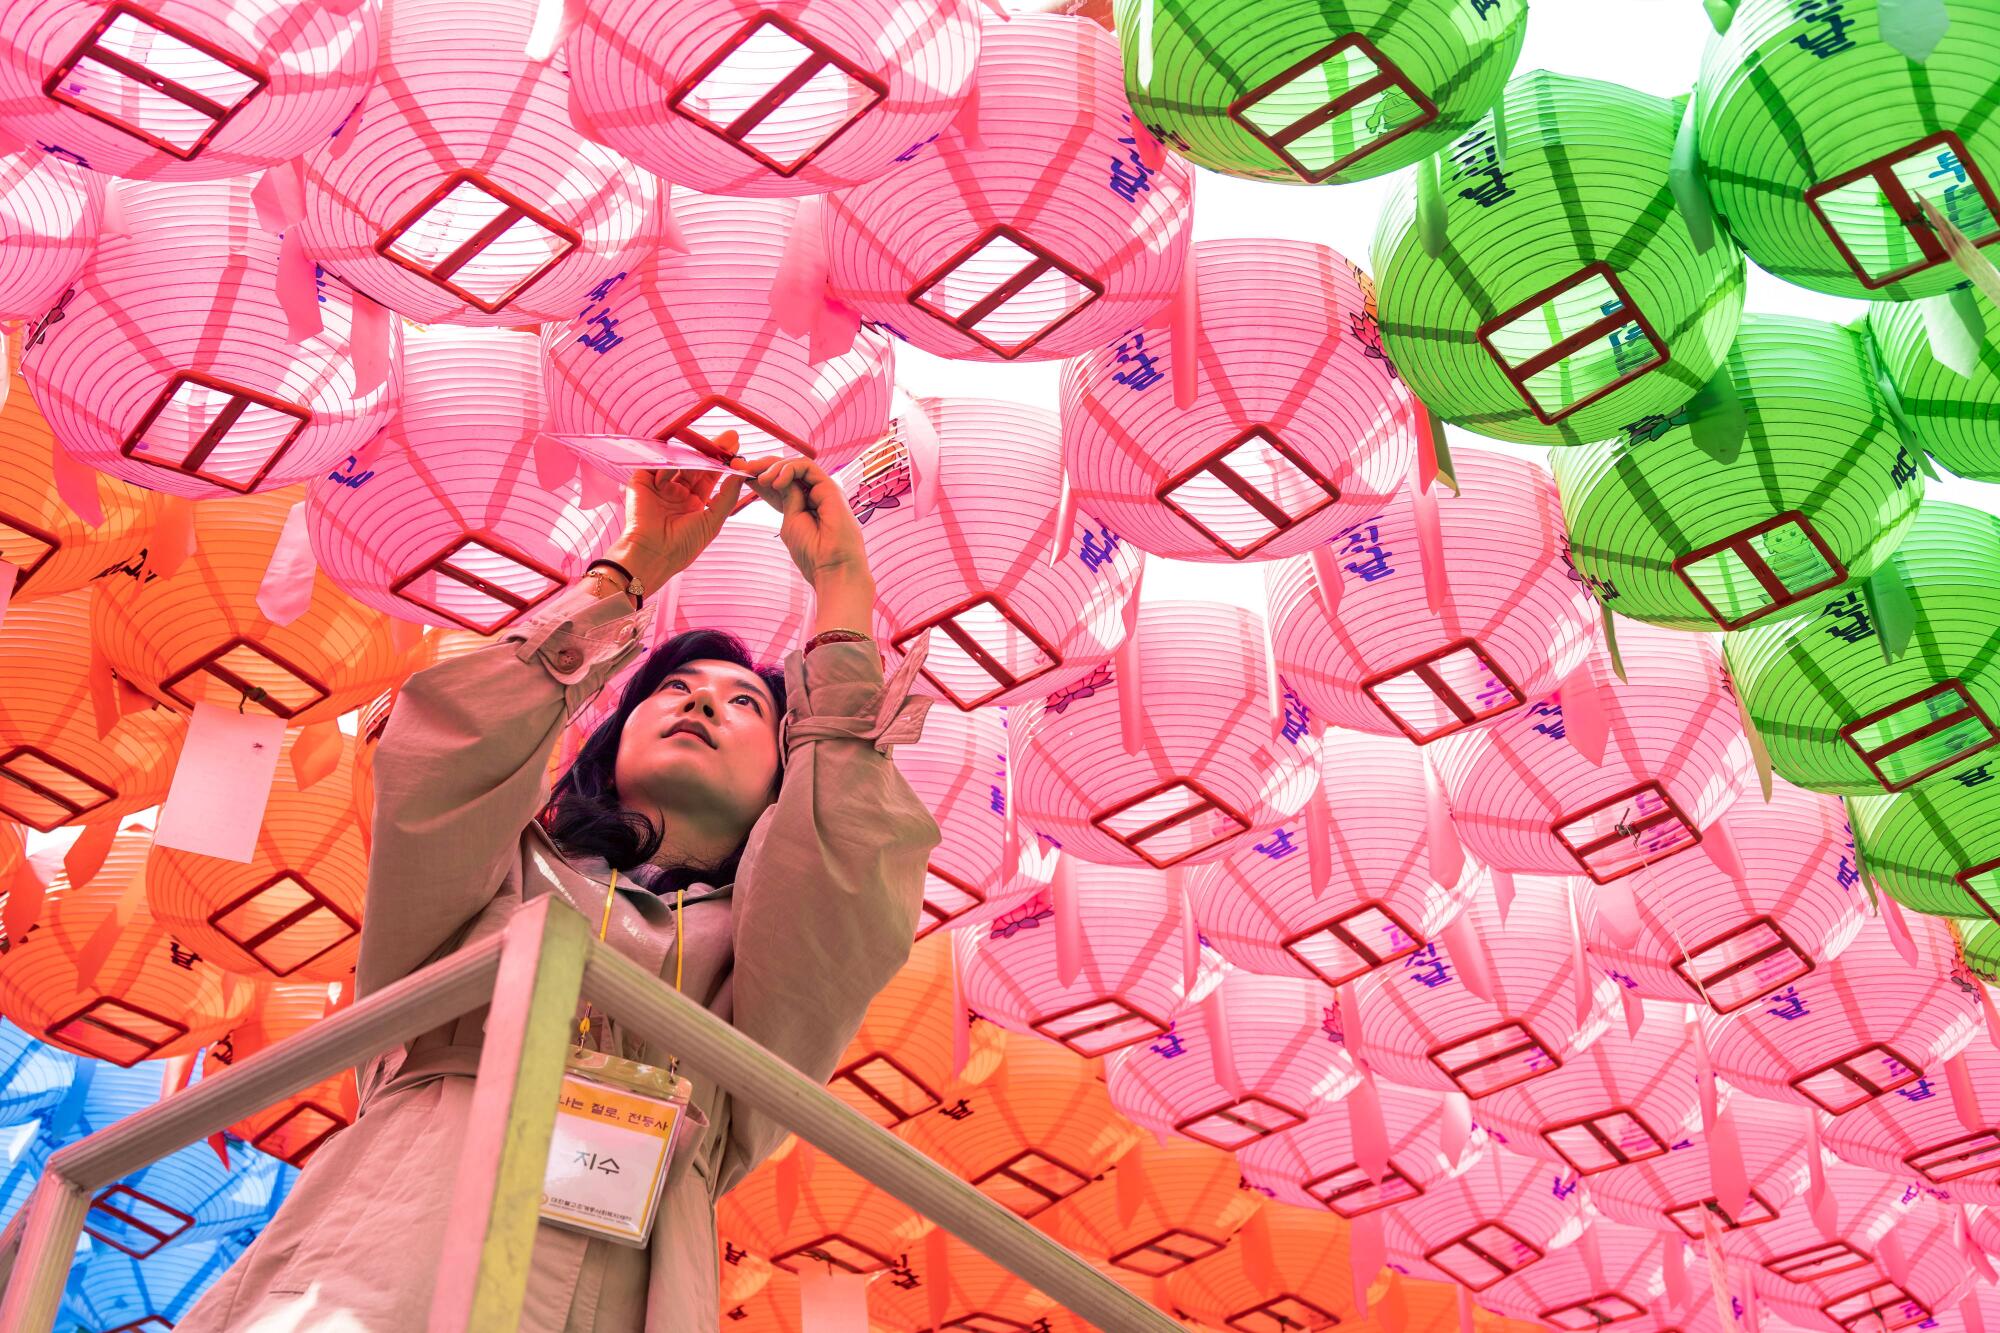 A woman with dark hair reaches up to place a note under one of many pink lanterns, flanked by green and orange ones.